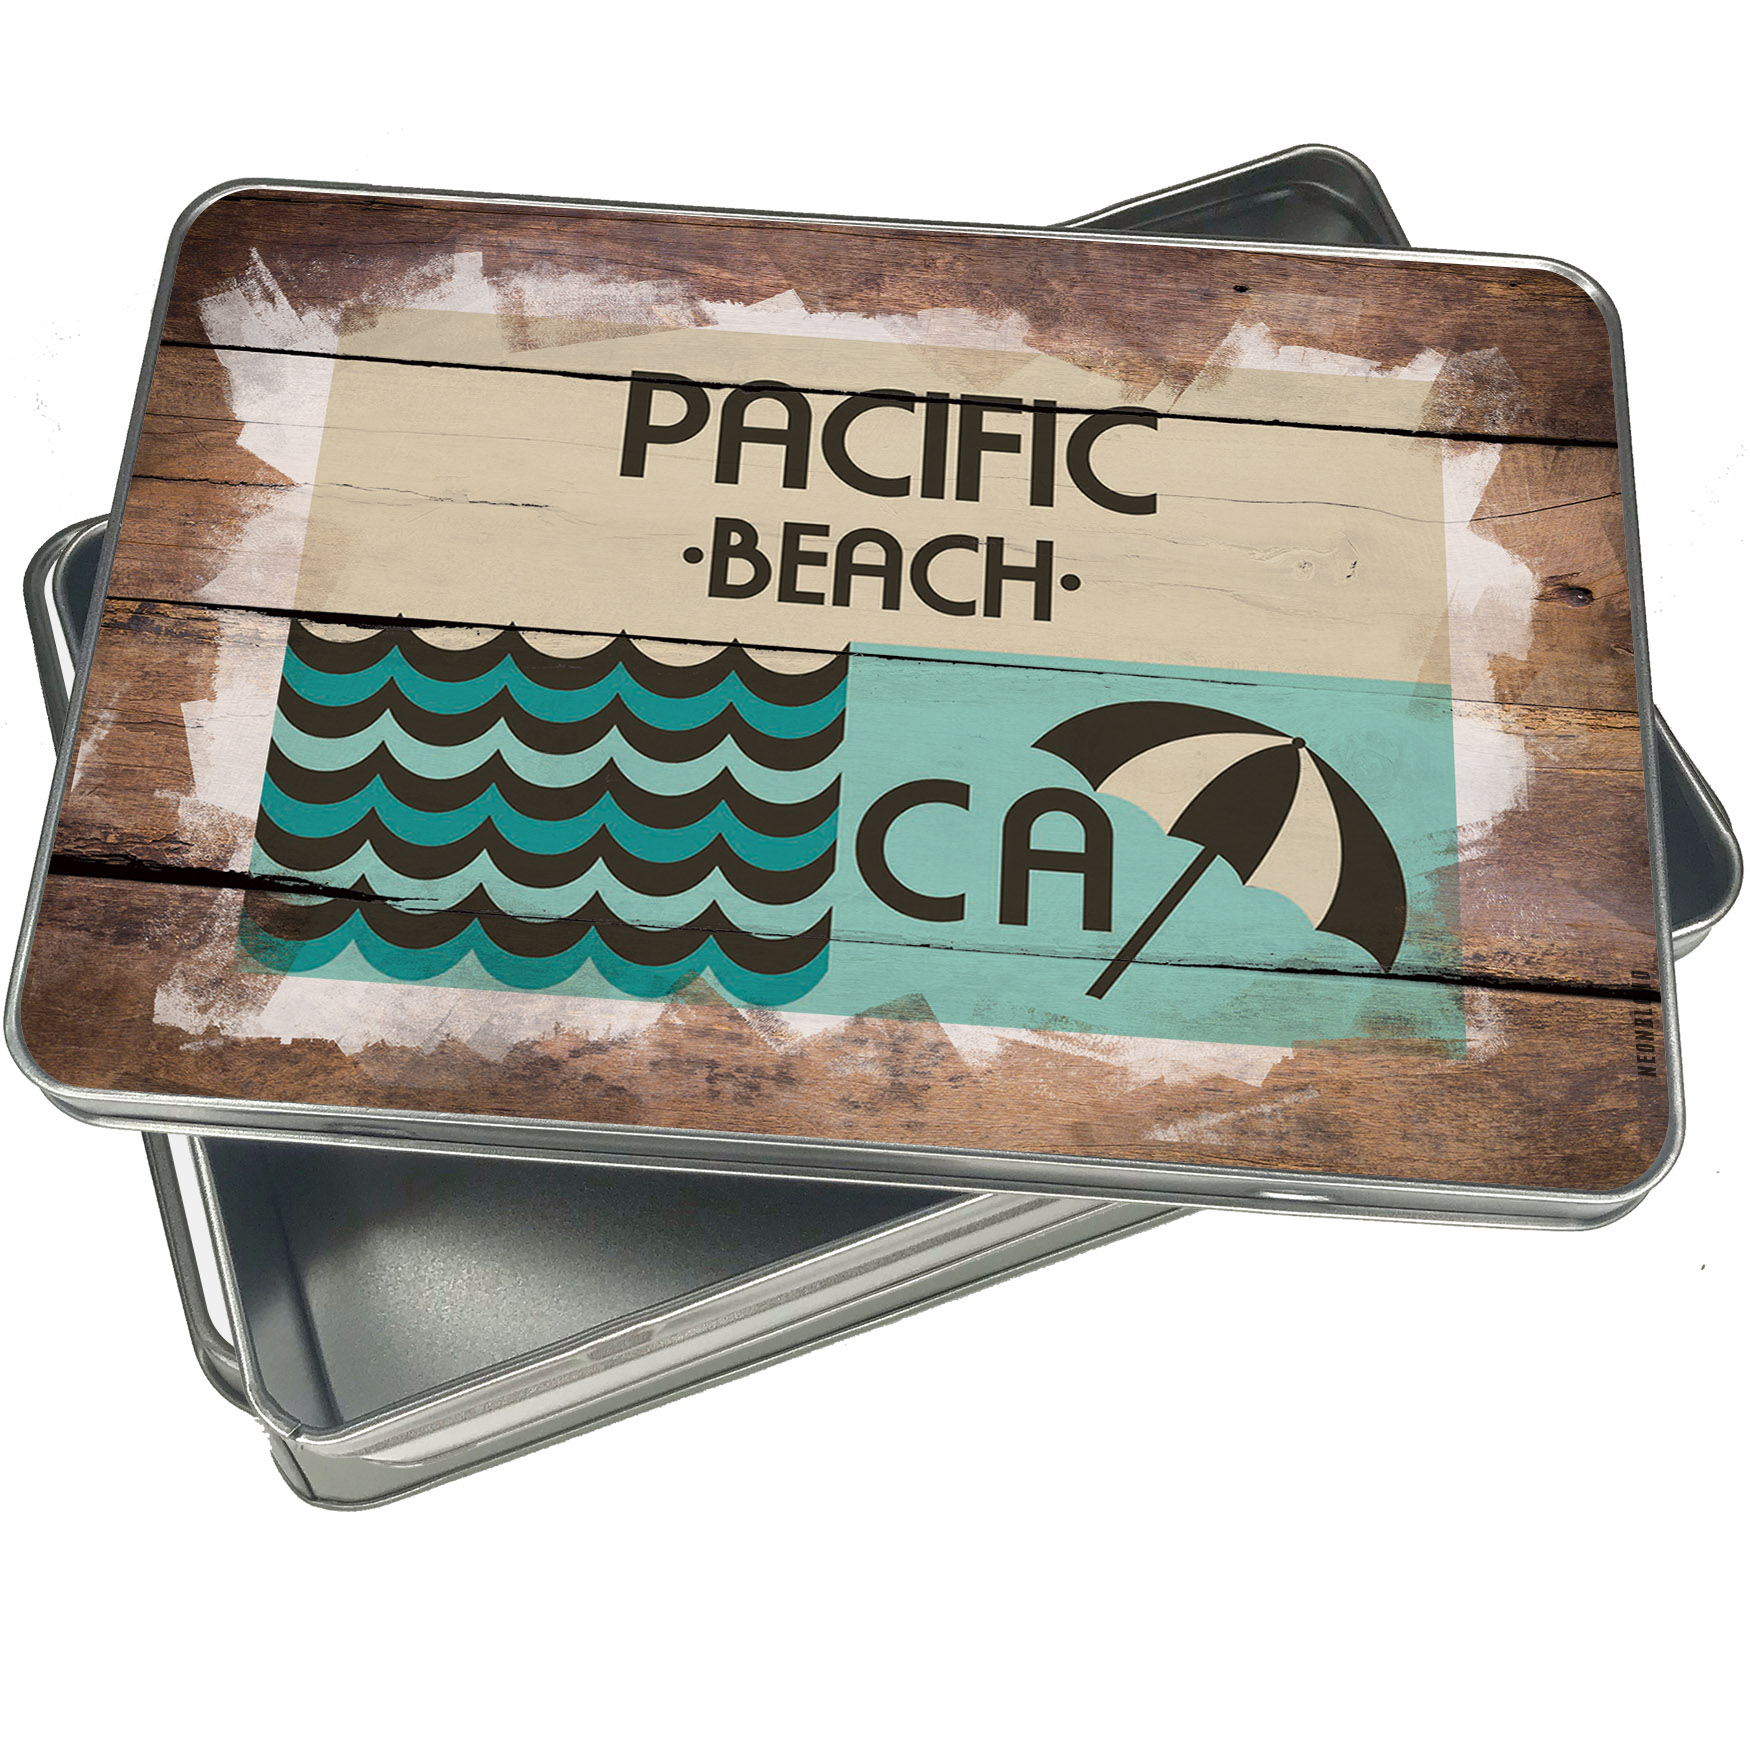 Christmas Cookie Tin US Beaches vacation Pacific Beach for Gift Giving Empty Candy Snack Pastry Treat Swap Box Cerebrate a Holiday - image 1 of 1